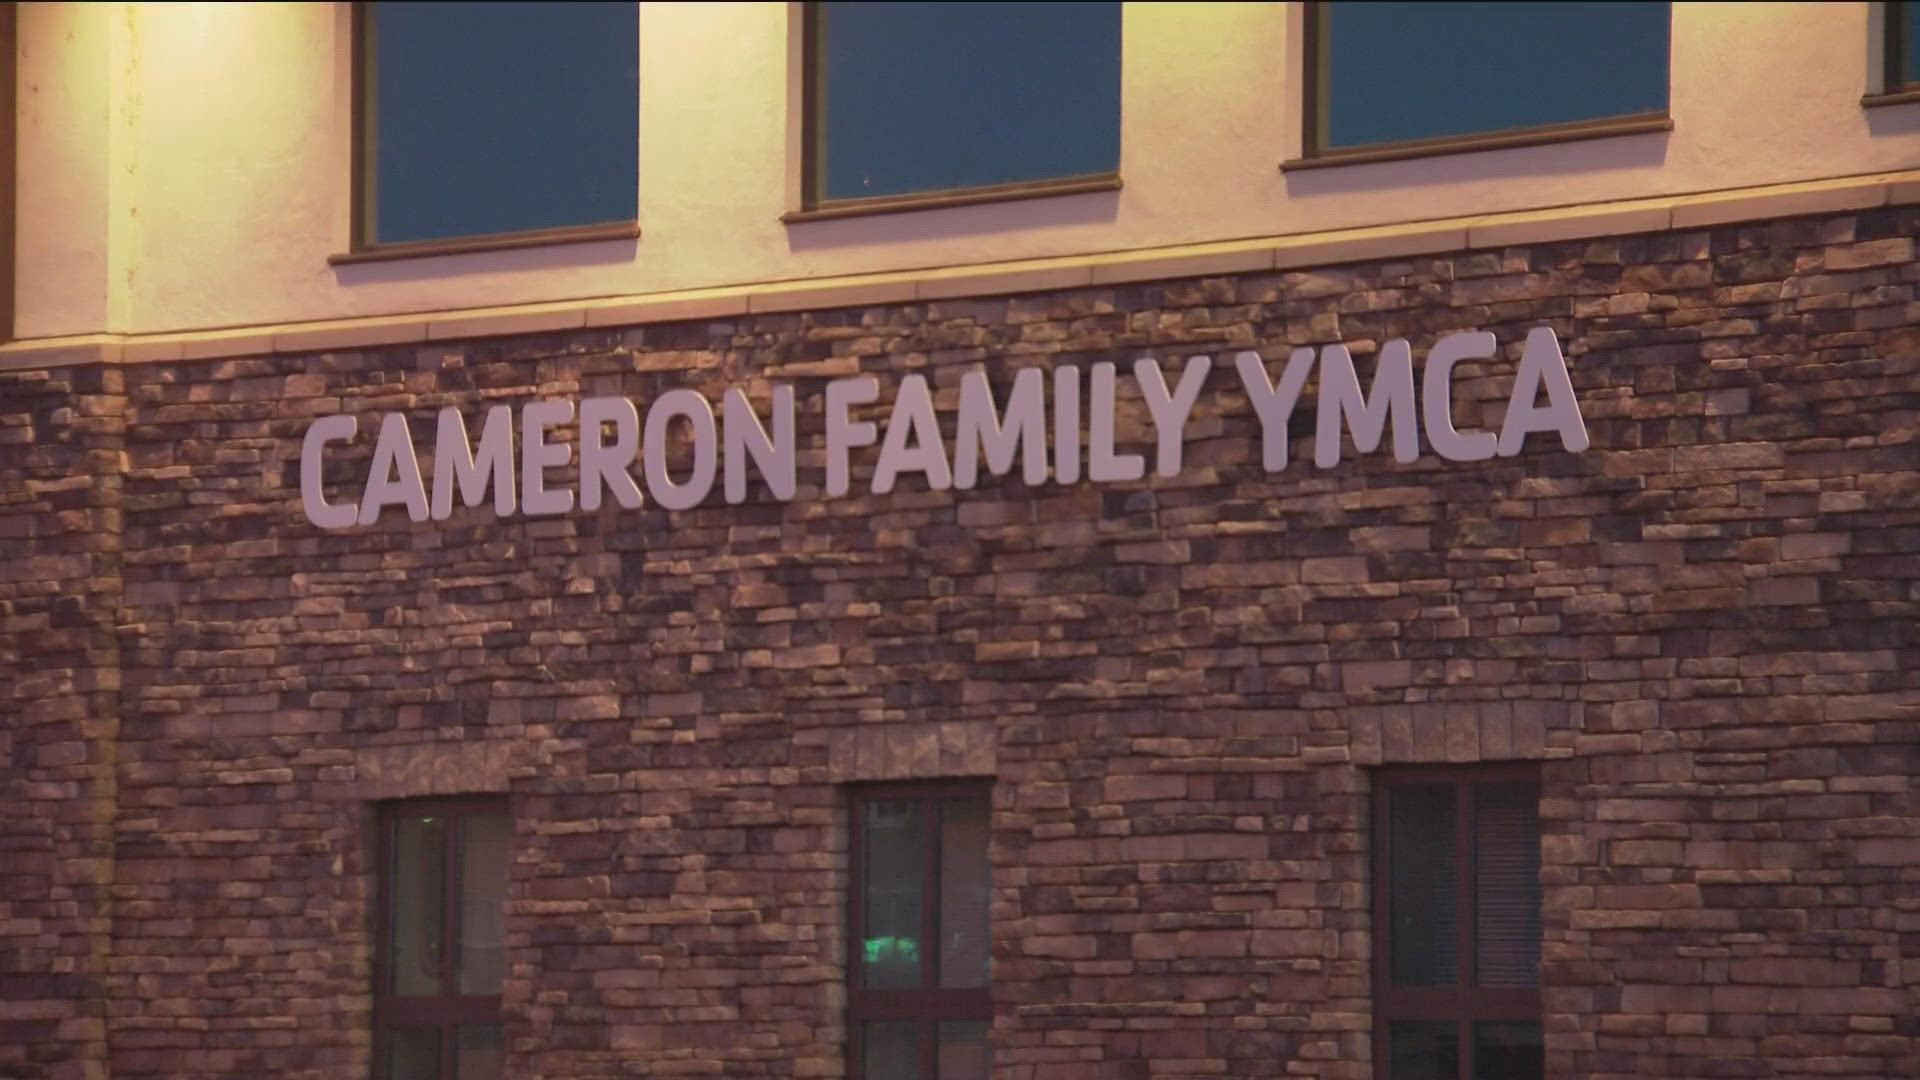 Management at the Cameron Family YMCA in Santee made the decision to close five hours early for safety reasons when they learned of those competing protests planned.